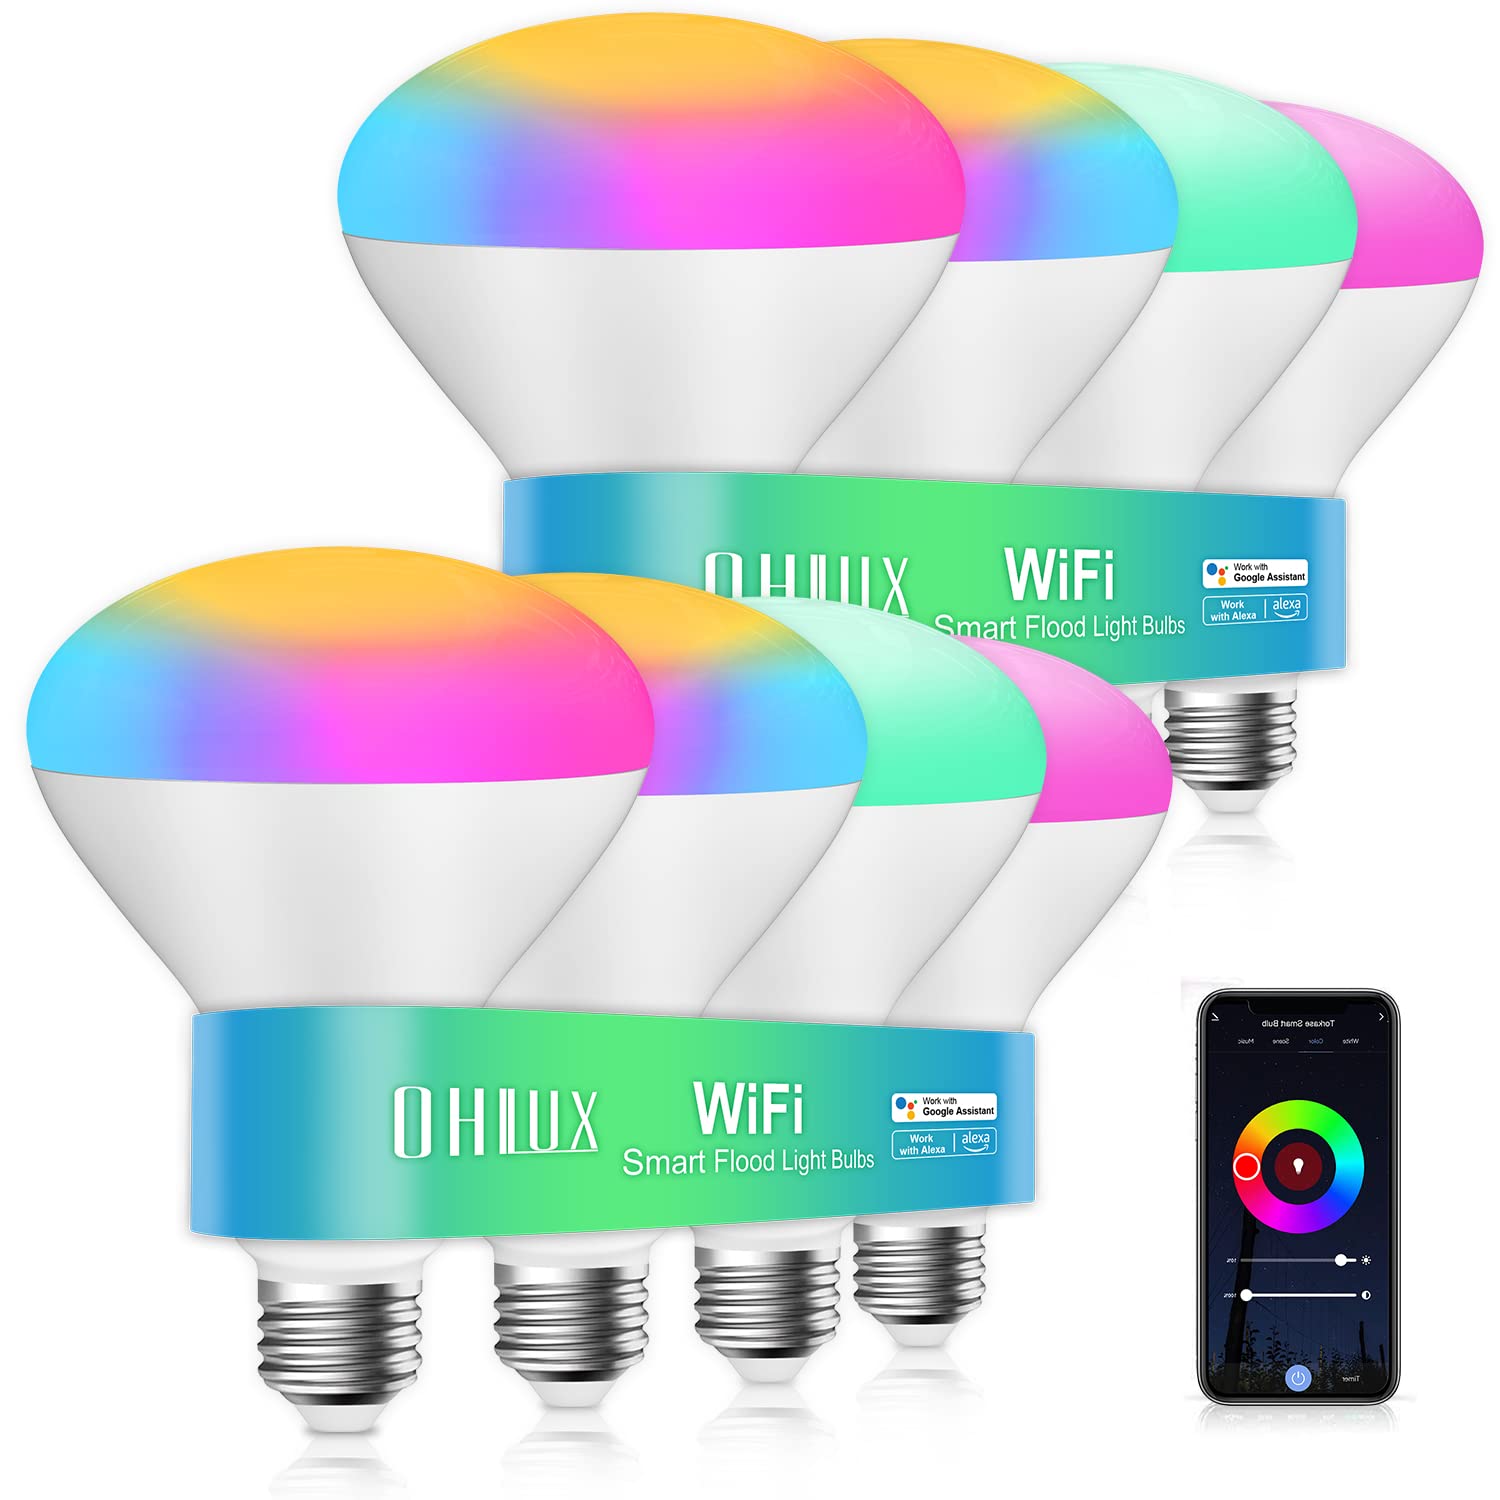 OHLUX Smart WiFi Flood Light Bulbs E26 Base 900Lumen (100W Equivalent),10W BR30 LED Bulb Compatible with Alexa, Google Home, Siri, 2700K-6500K Dimmable, Indoor use (No hub Required) - 8Pack